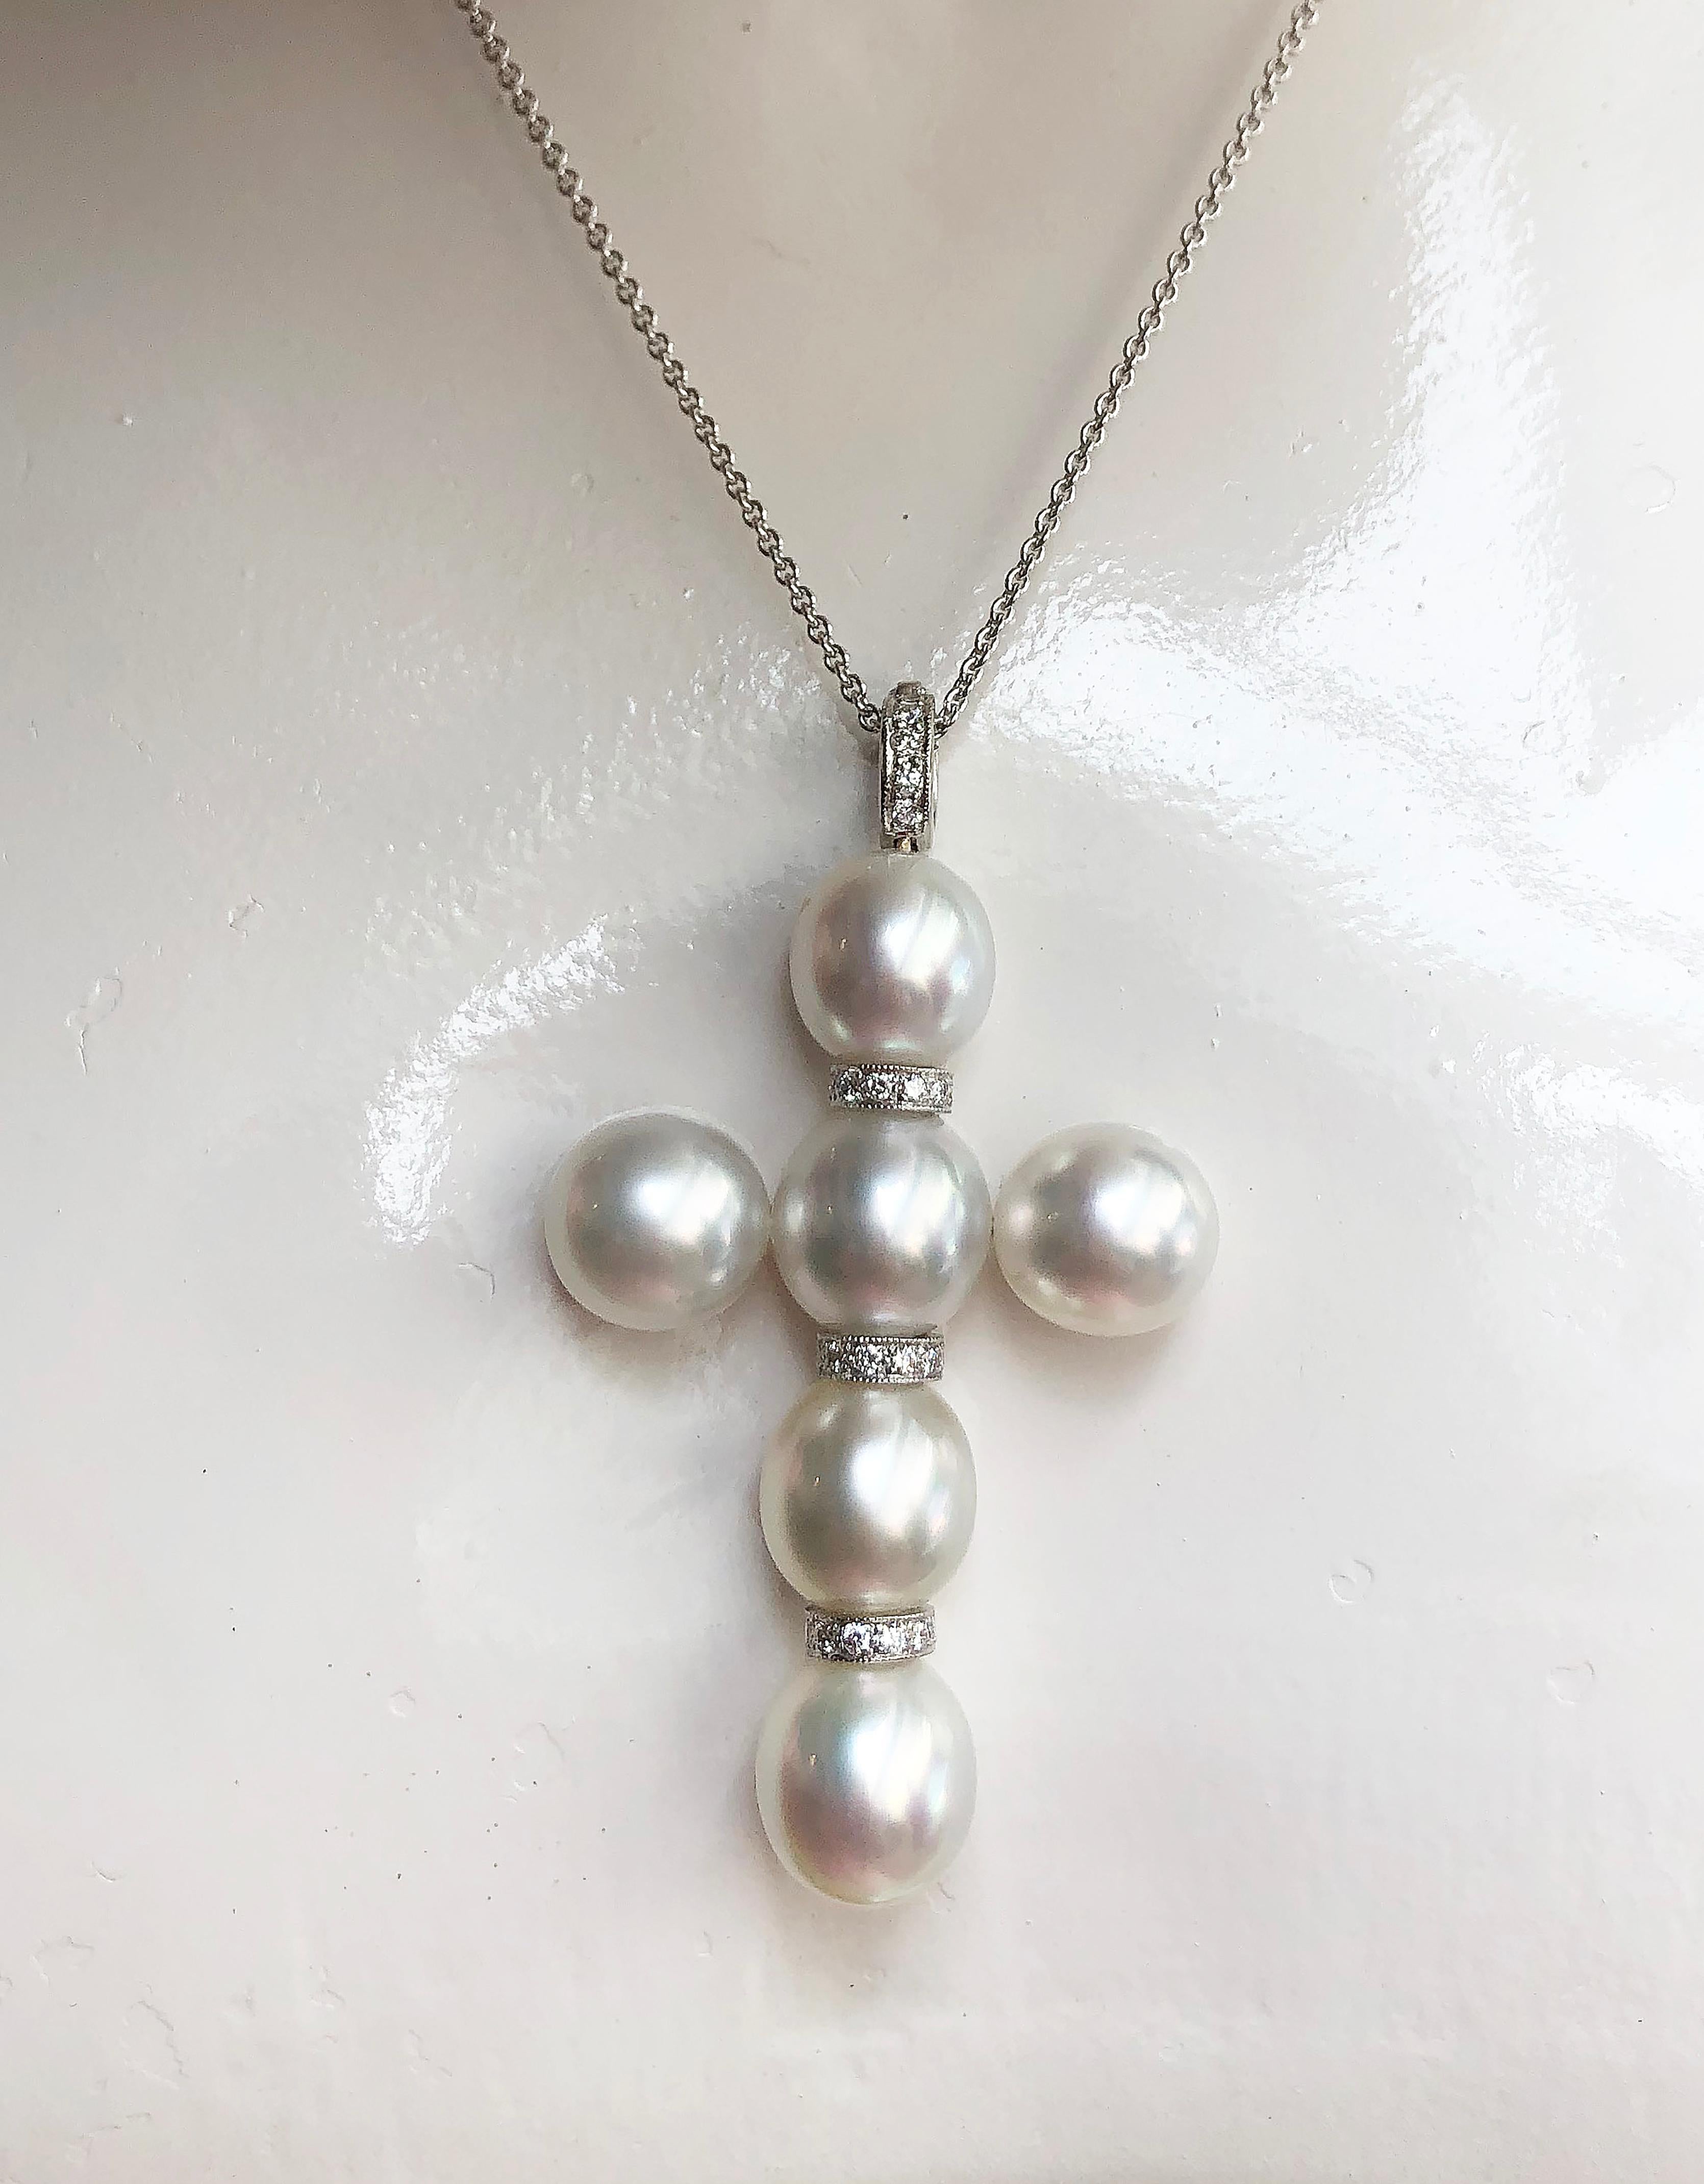 South Sea Pearl with Diamond 0.30 carat Cross Pendant set in 18 Karat White Gold Settings
(chain not included) 

Width: 3.4 cm
Length: 6.0 cm 

